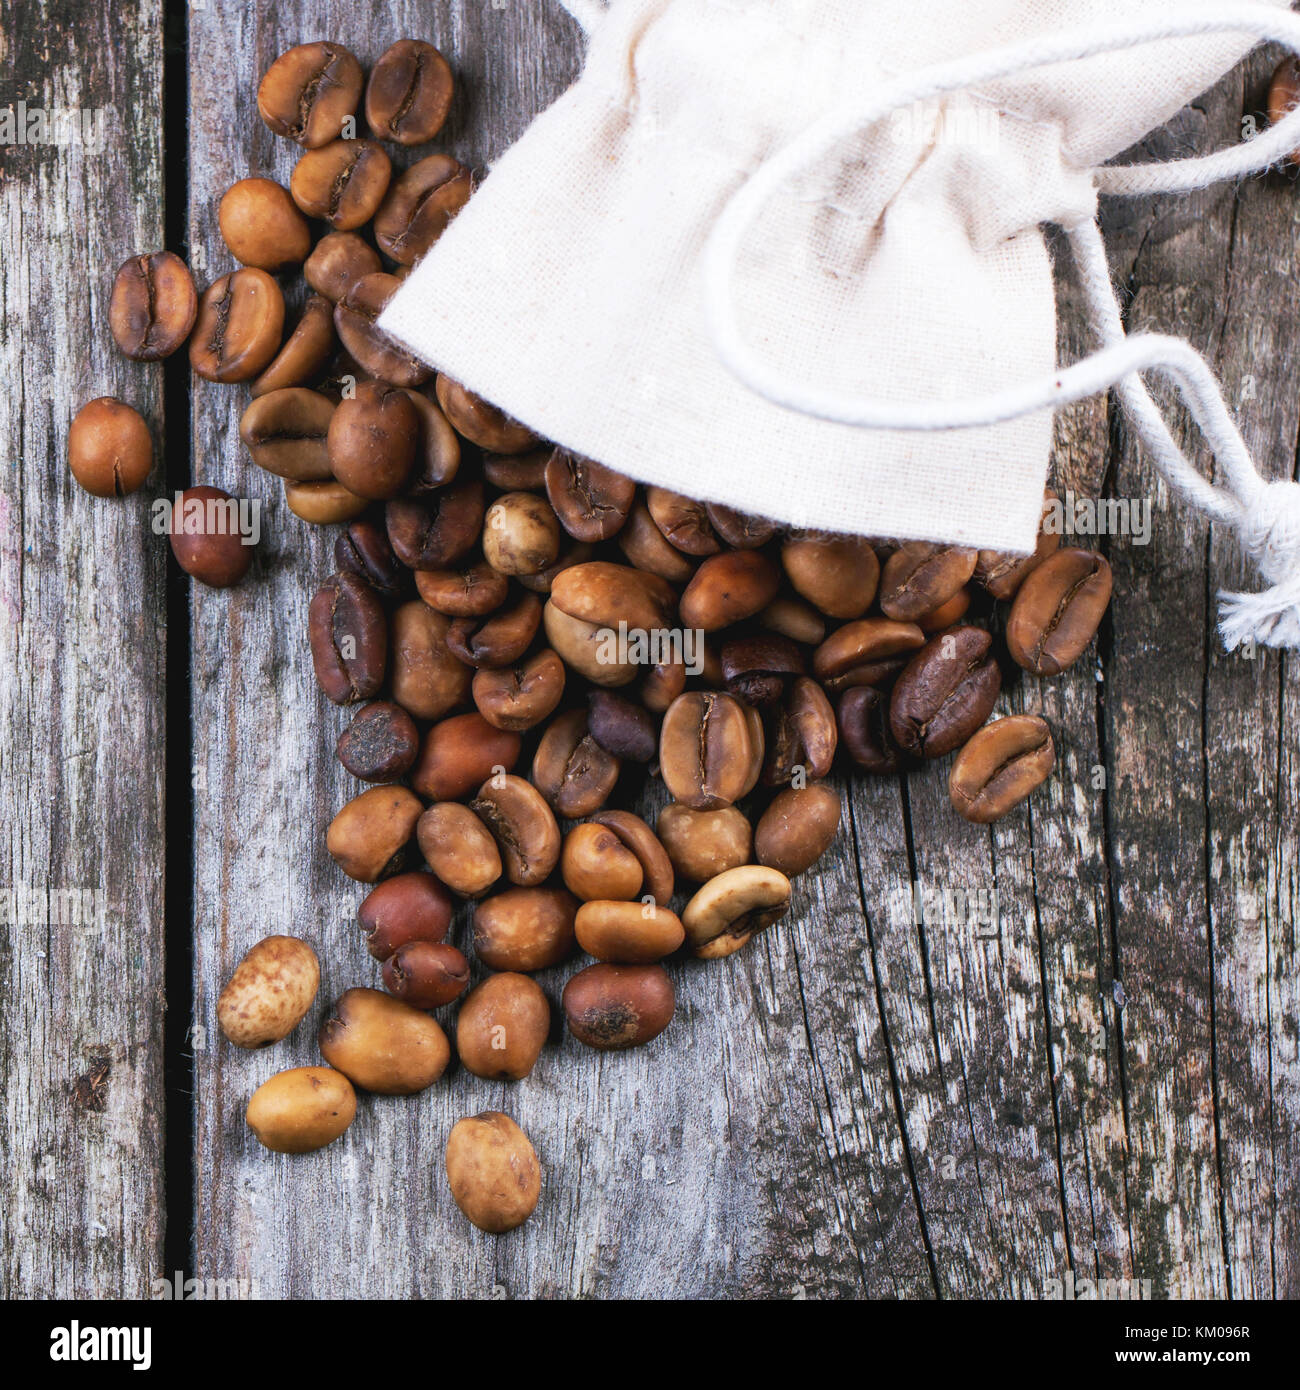 Sack with unroasted decaf coffee beans over wooden background. Top view. Square image Stock Photo